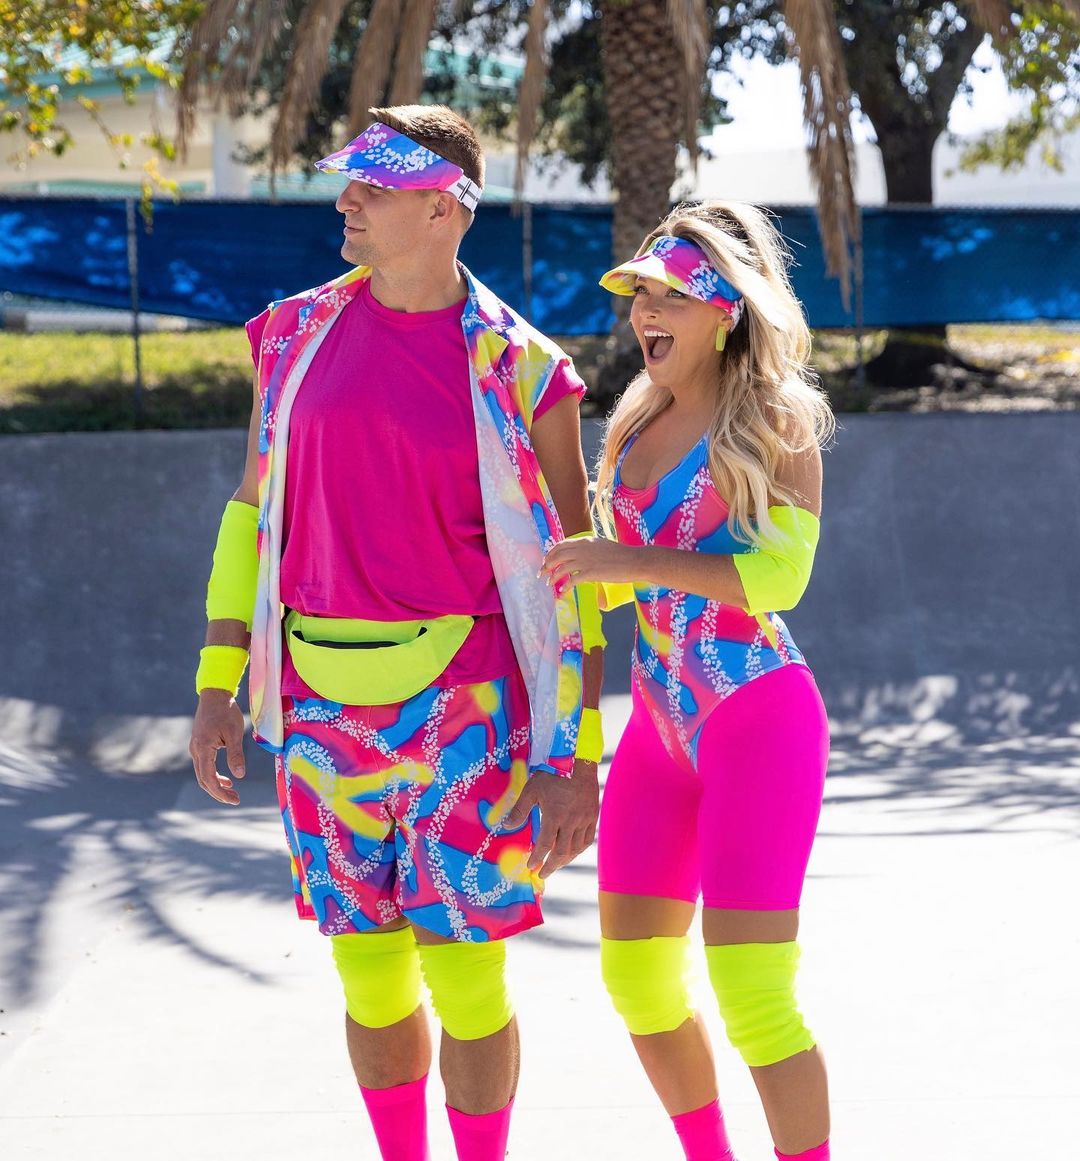 Gronk and Camille Kostek as Margot Robbie and Ryan Gosling’s Ken and Barbie! - Photo 3